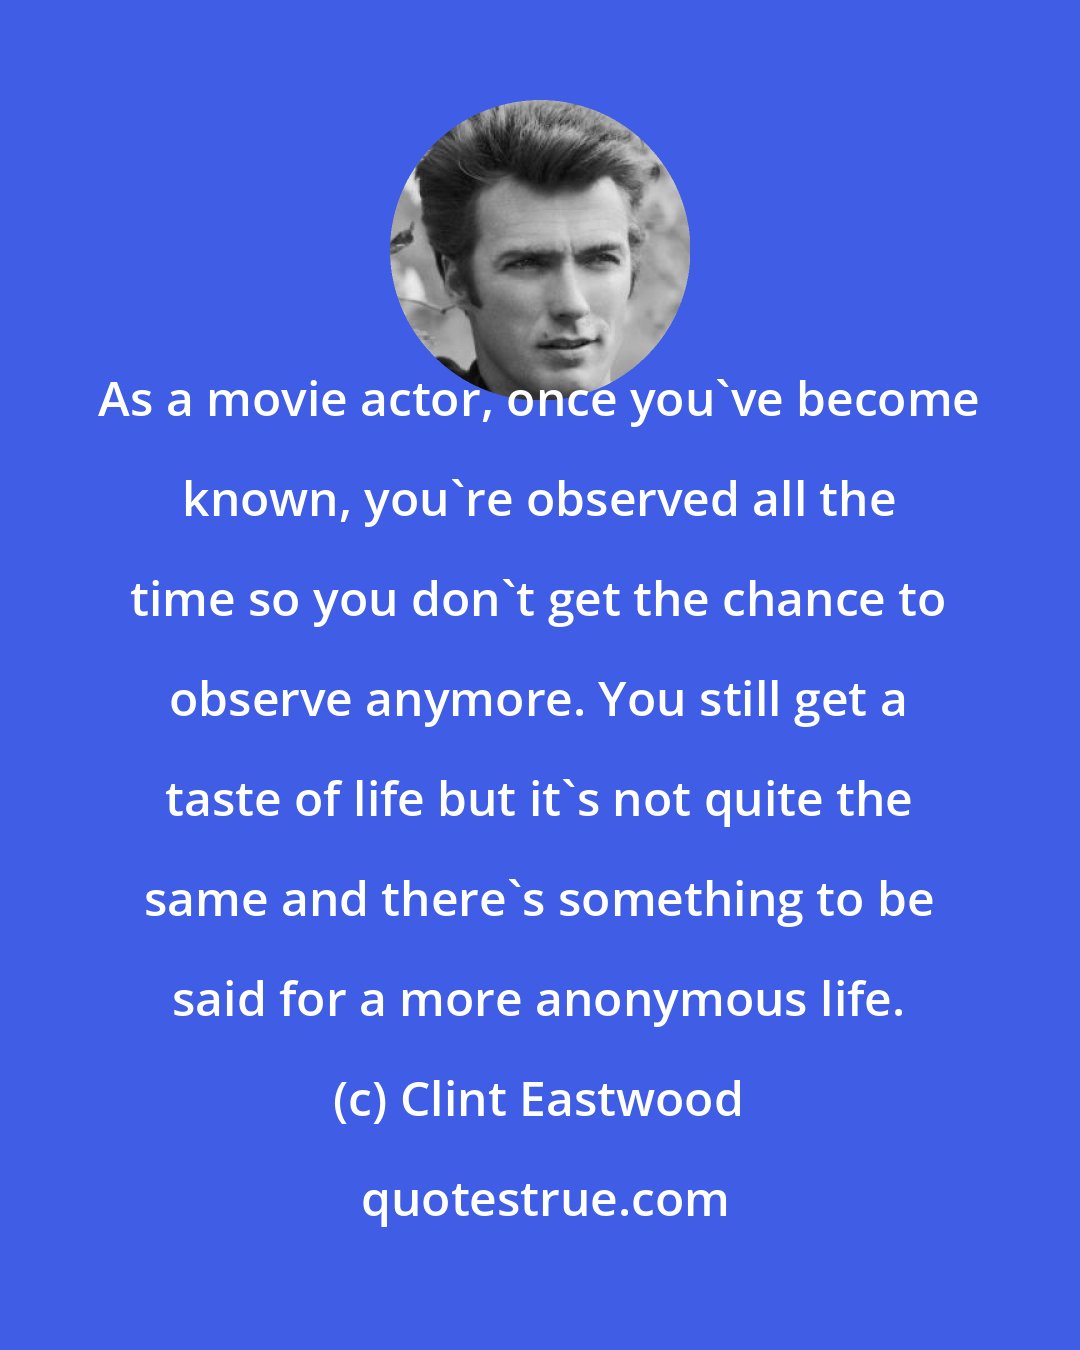 Clint Eastwood: As a movie actor, once you've become known, you're observed all the time so you don't get the chance to observe anymore. You still get a taste of life but it's not quite the same and there's something to be said for a more anonymous life.